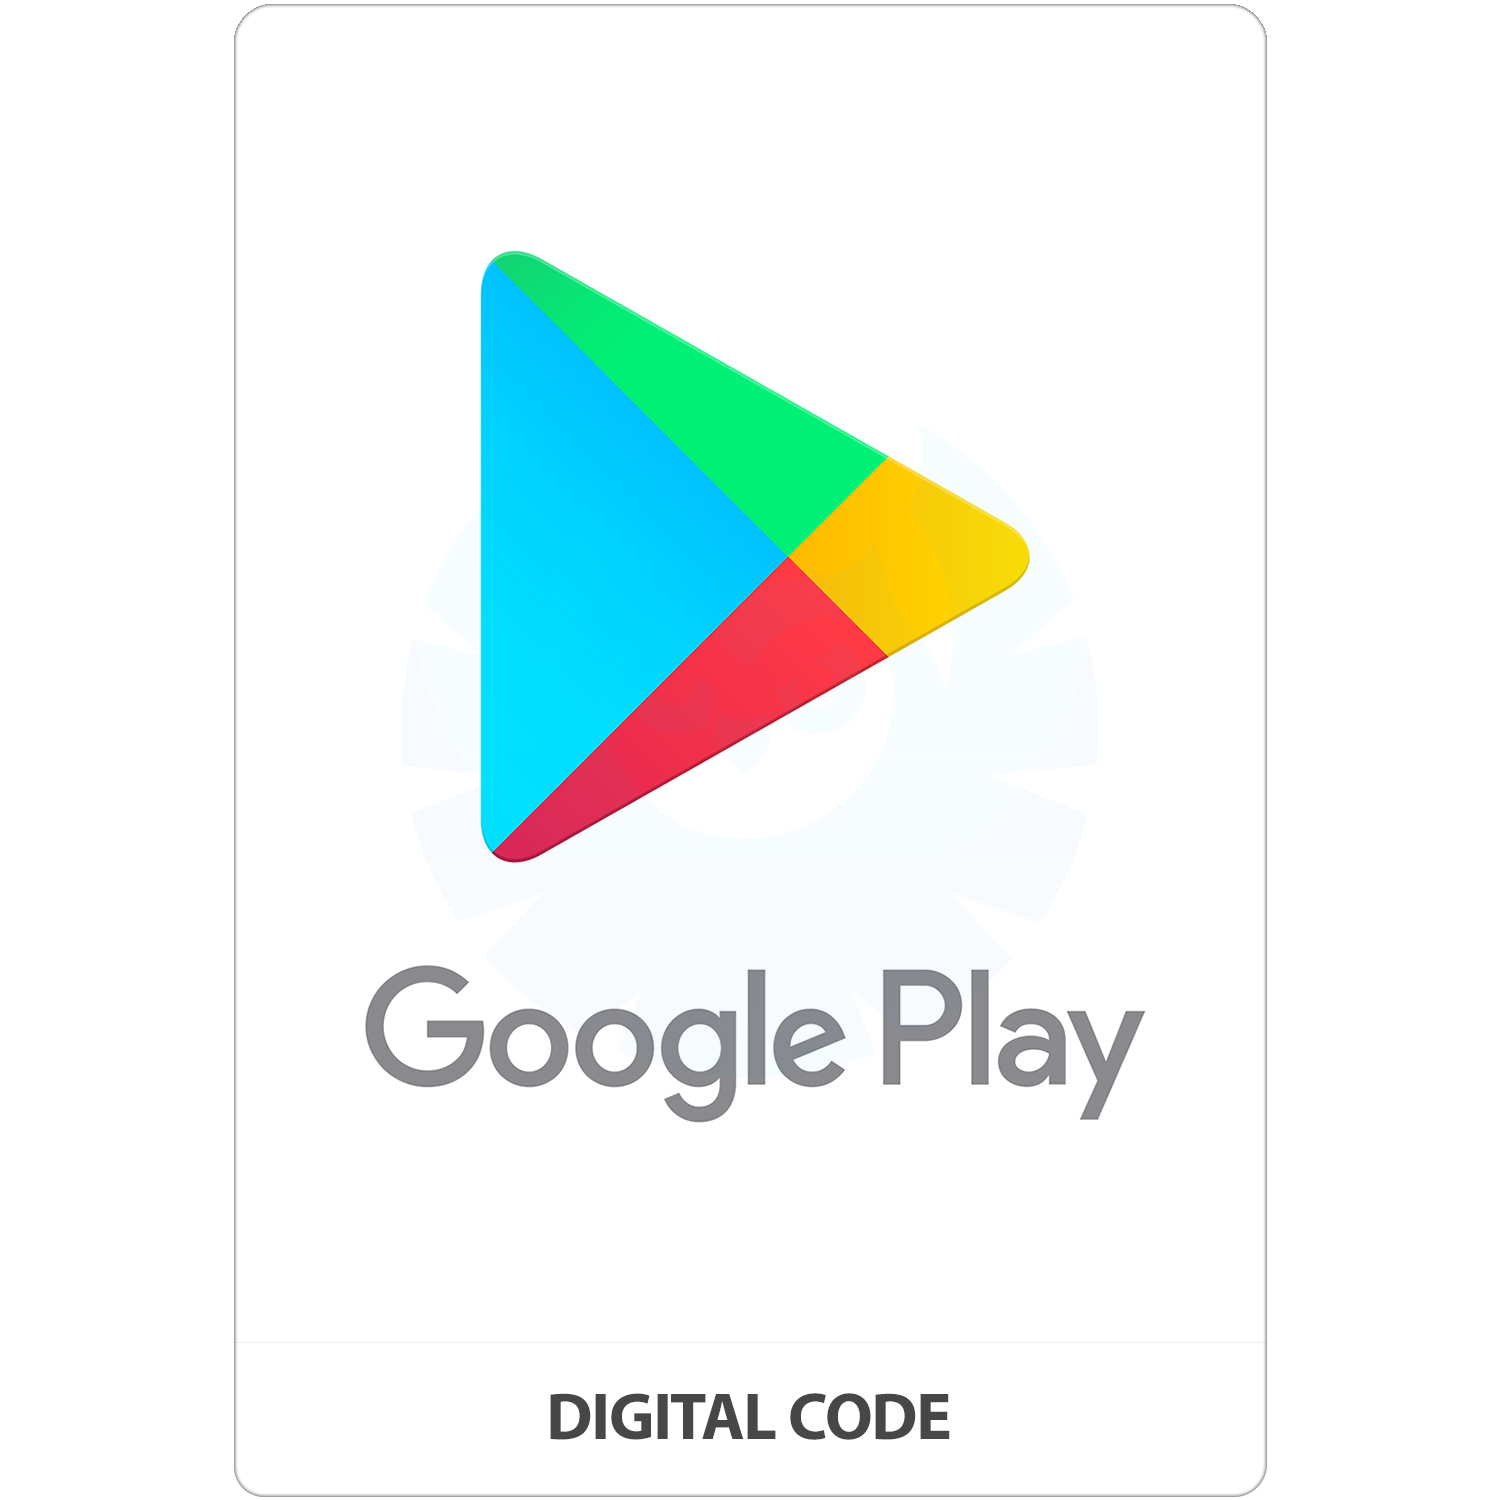 Hi, I a, having their Issues with the Google Play Gift Card so I need to  redeem Google Play Gift Card but I need to Confirm my account. You're about  too add